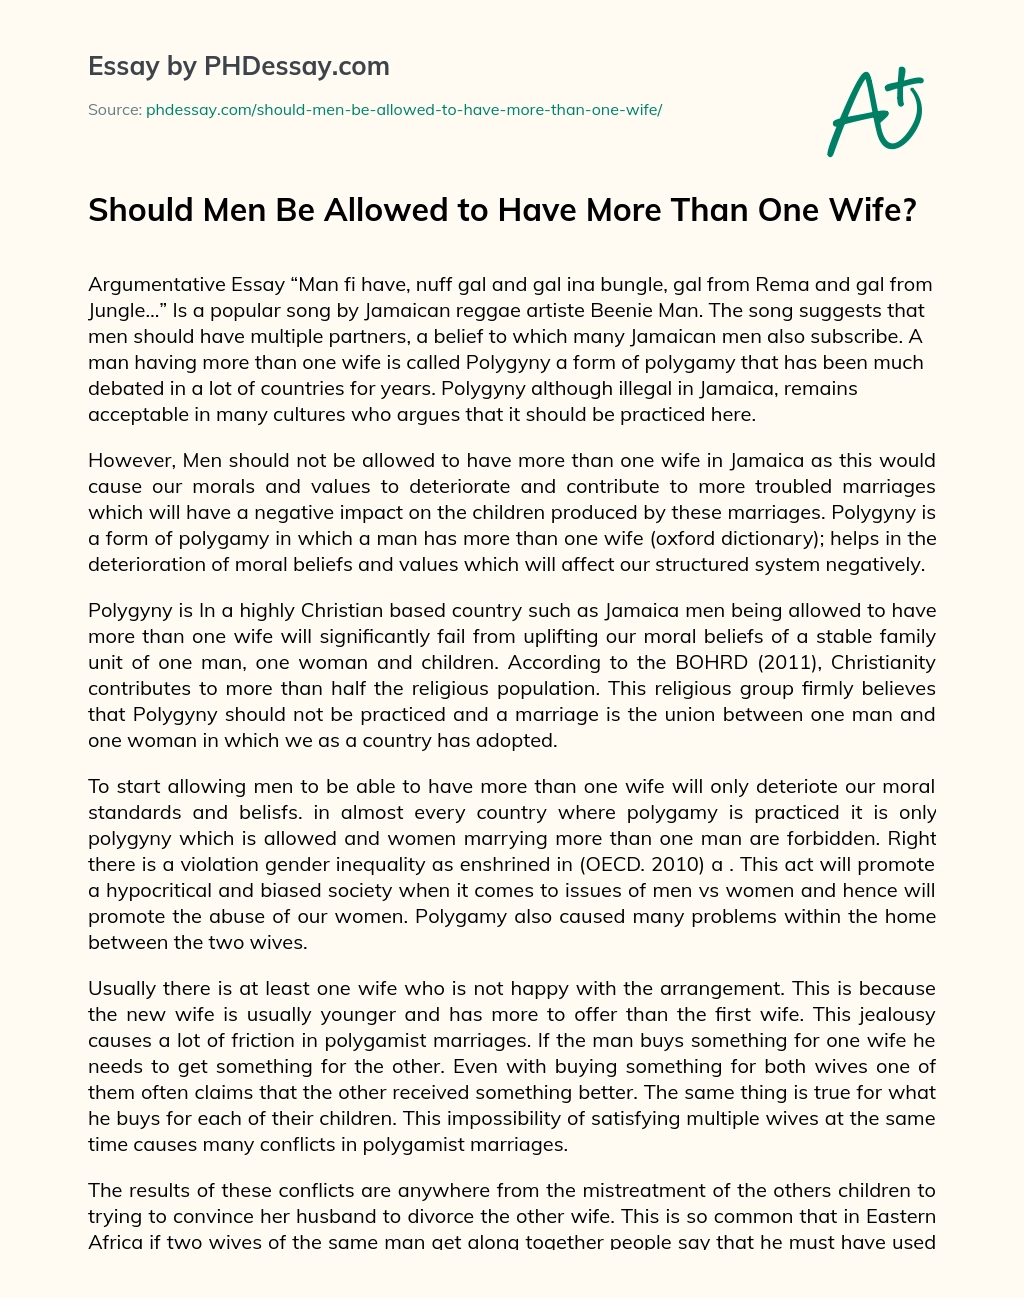 Should Men Be Allowed to Have More Than One Wife? essay